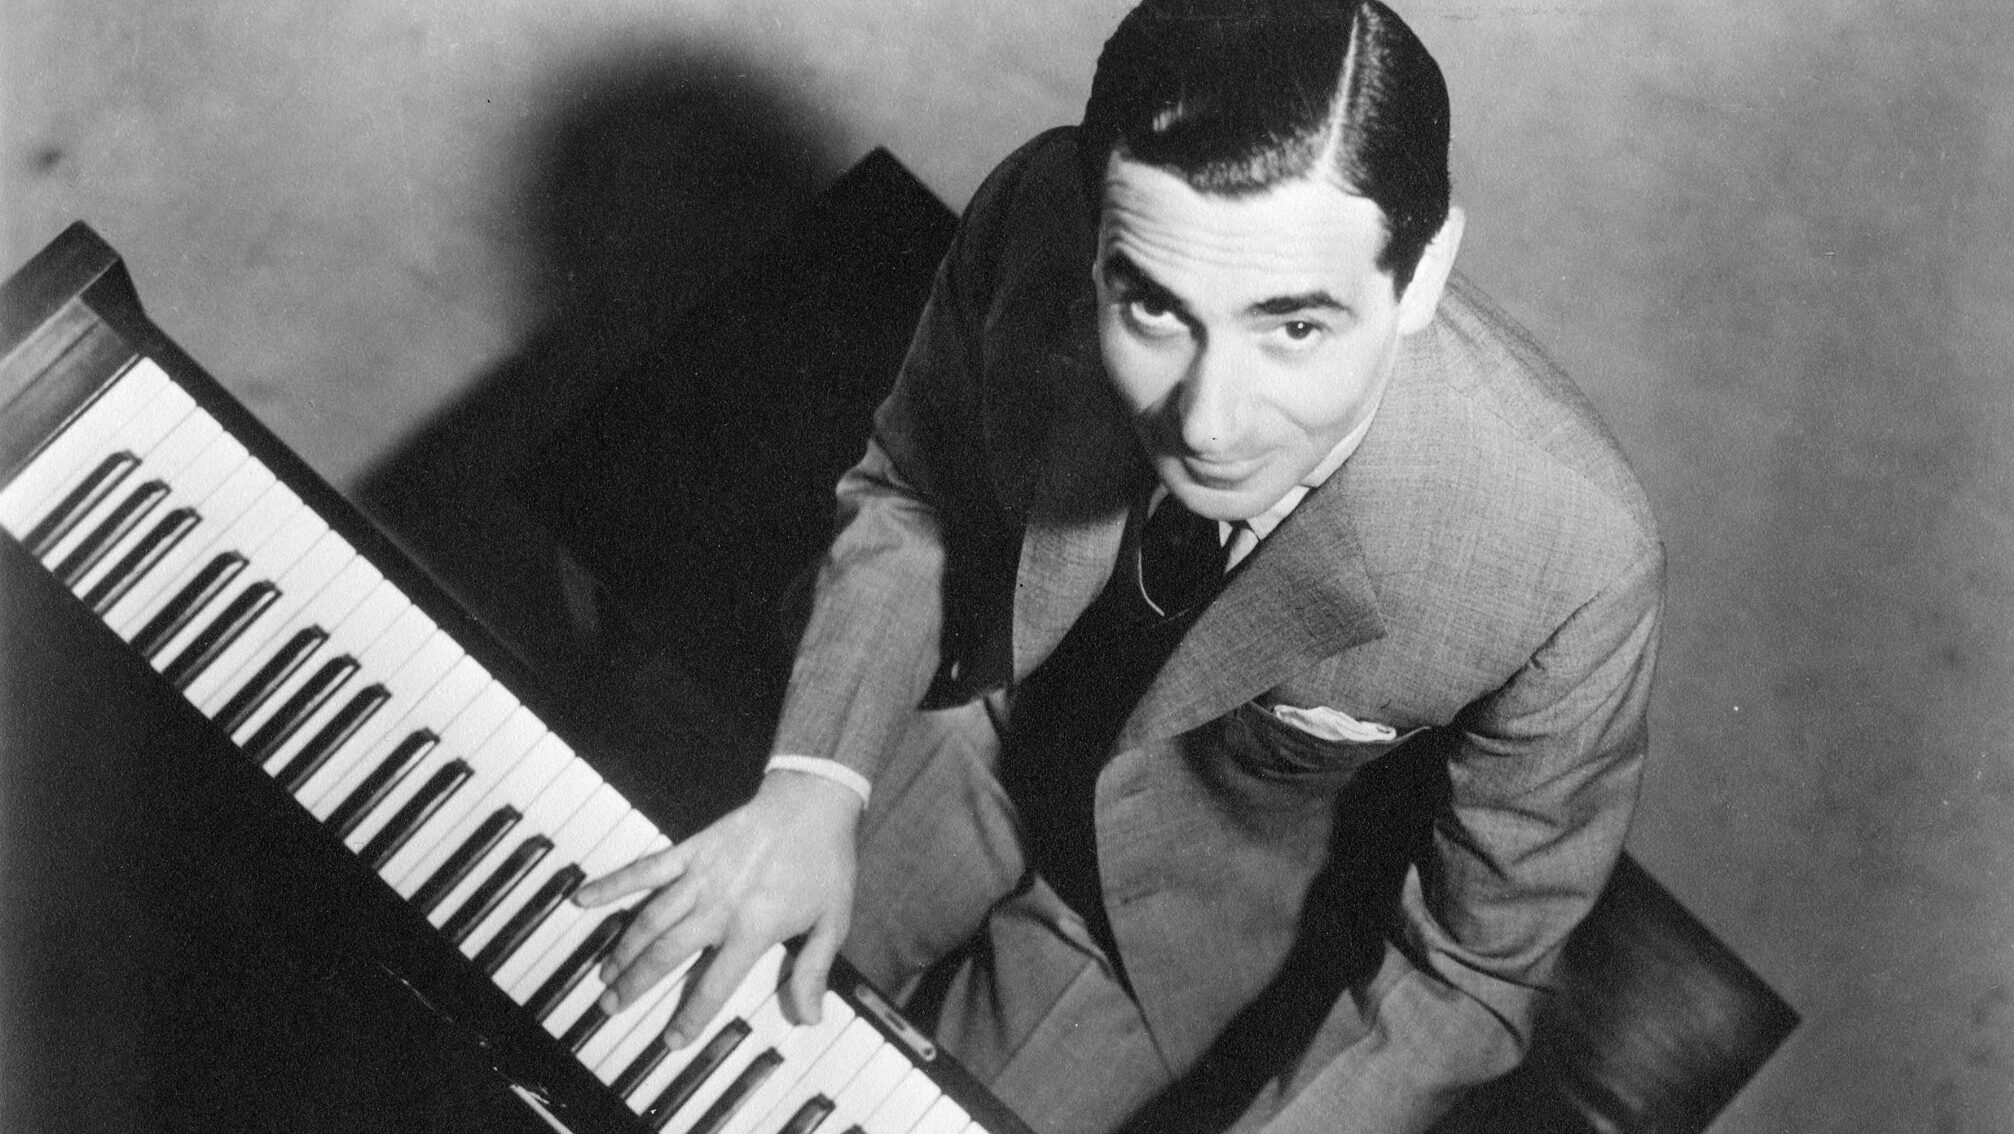 Universal Music Publishing Group strikes global deal to represent song catalog of Irving Berlin – Music Business Worldwide